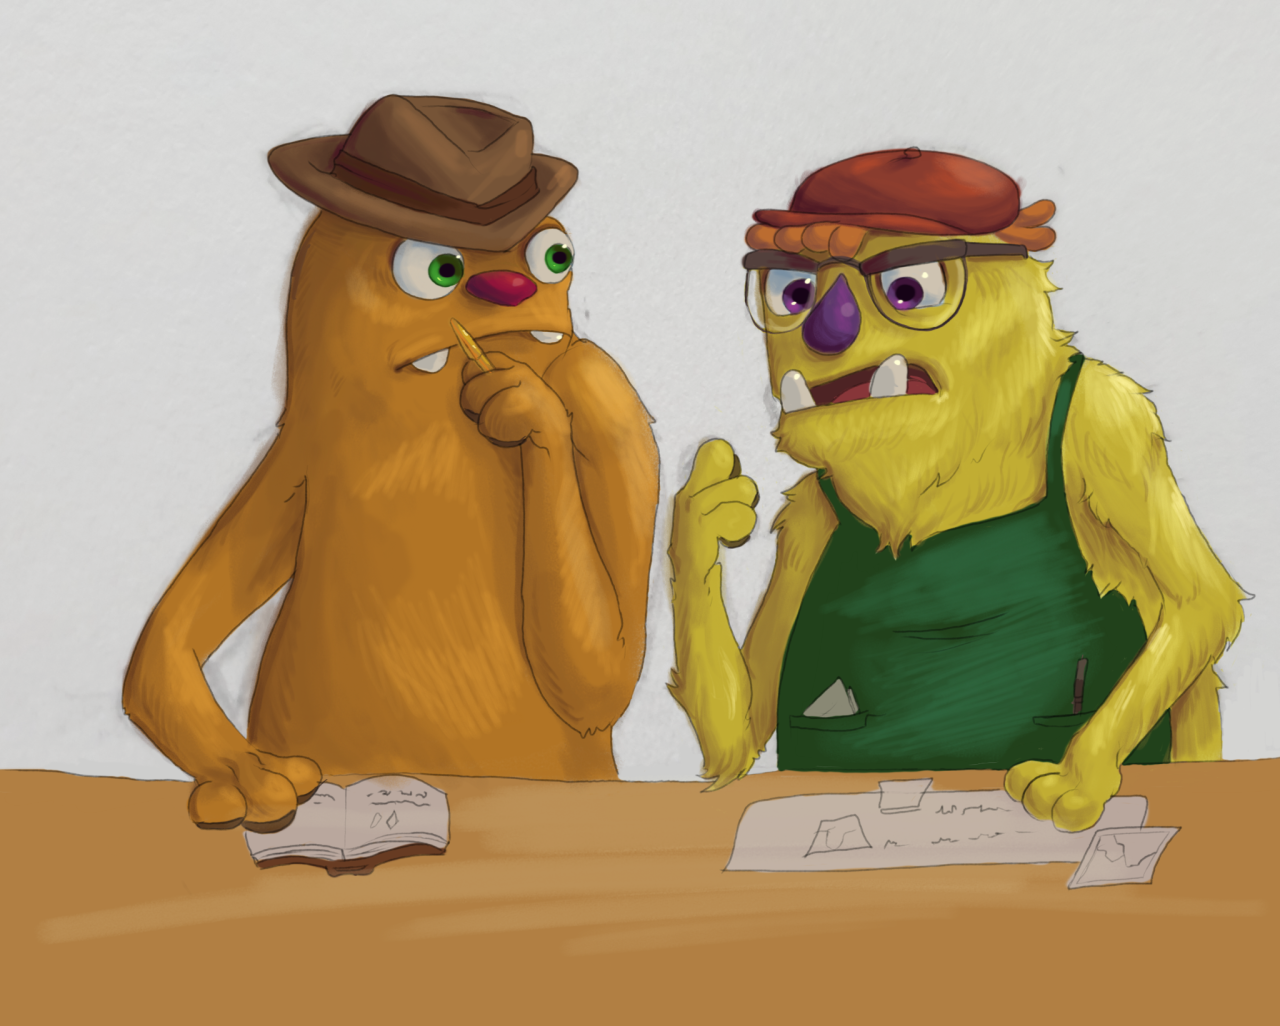 Buddy and Snorpy sitting at a table, discussing something. Buddy, on the left, is an orange grumpus of average build with short fur, green eyes, a small red nose, and an overbite with two short tusks, and they are wearing a brown fedora. They are holding a pen with their left paw and holding a journal open with their right, and they are listening to Snorpy. Snorpy, on the right, is a chubby yellow grumpus with purple eyes, shaggy fur, curly ginger hair, an underbite with two rounded tusks, and a purple, pear-shaped nose. He is wearing a red flat cap, a green work apron and glasses. He is talking passionately and gesturing to some papers on the table.